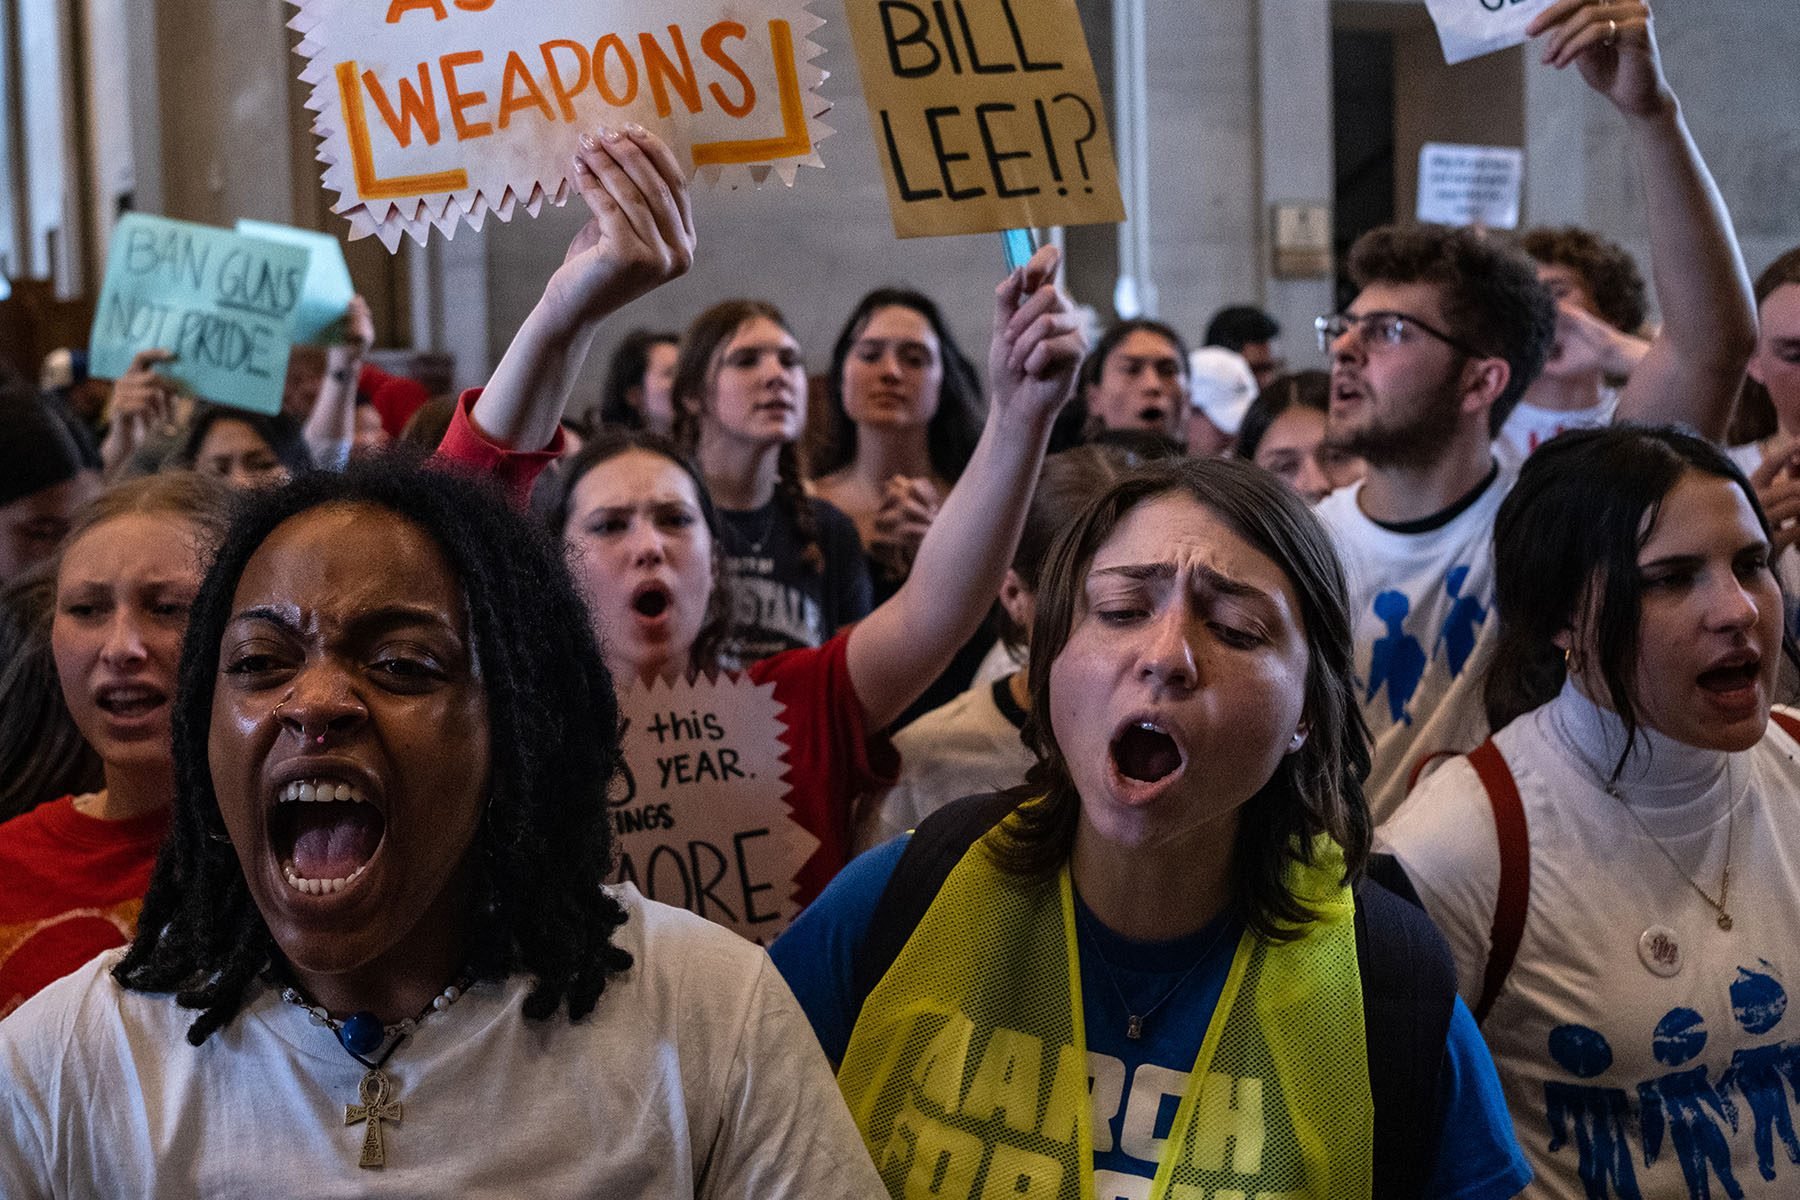 Protestors call for gun reform laws at Tennessee State Capitol building on April 6, 2023 in Nashville, Tennessee.